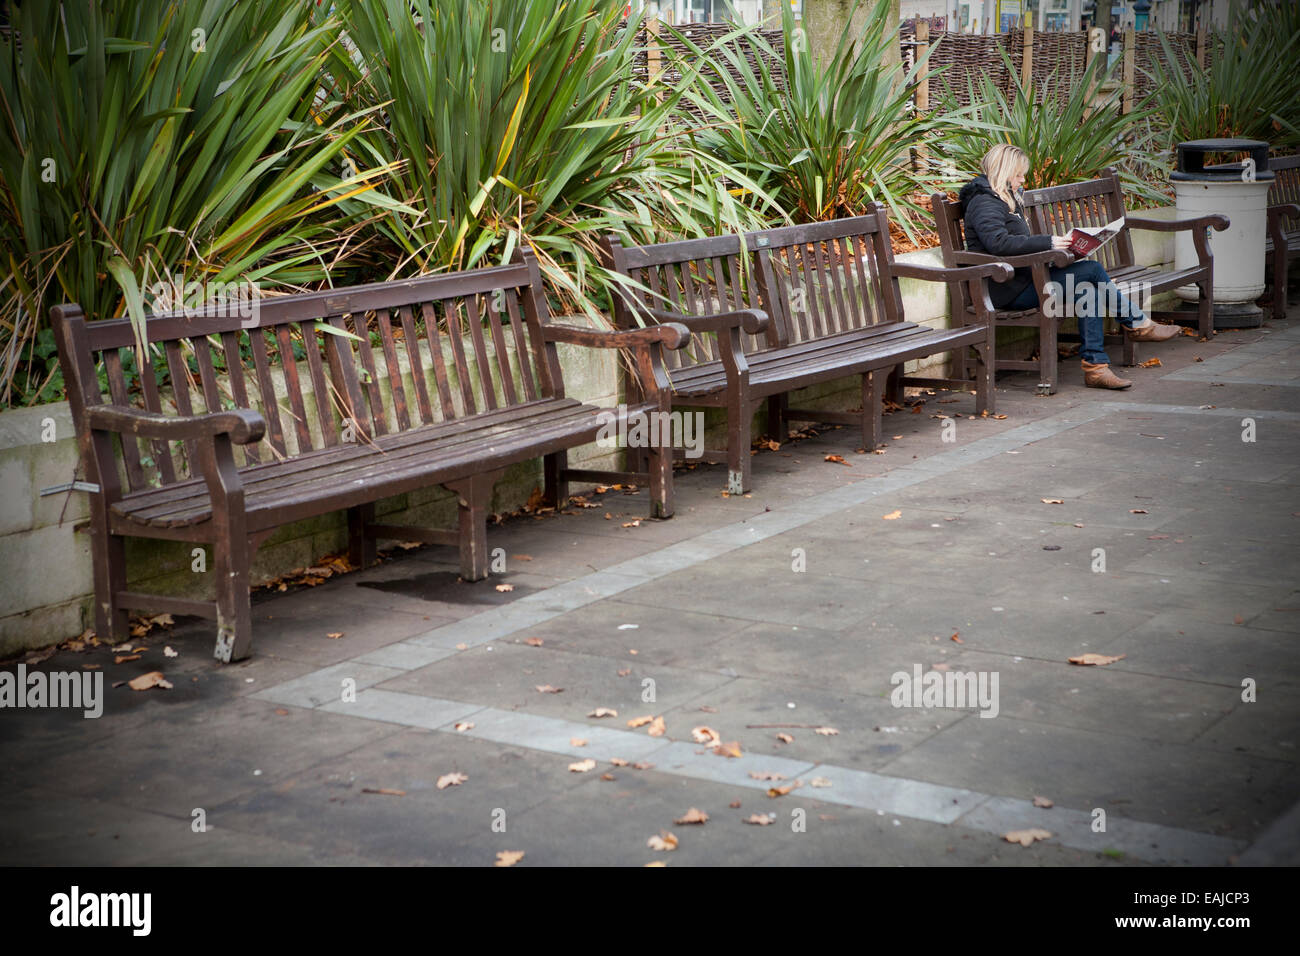 Solitary adult woman sitting alone with head in hands sitting on bench by herself, Southport, Merseyside,UK Stock Photo